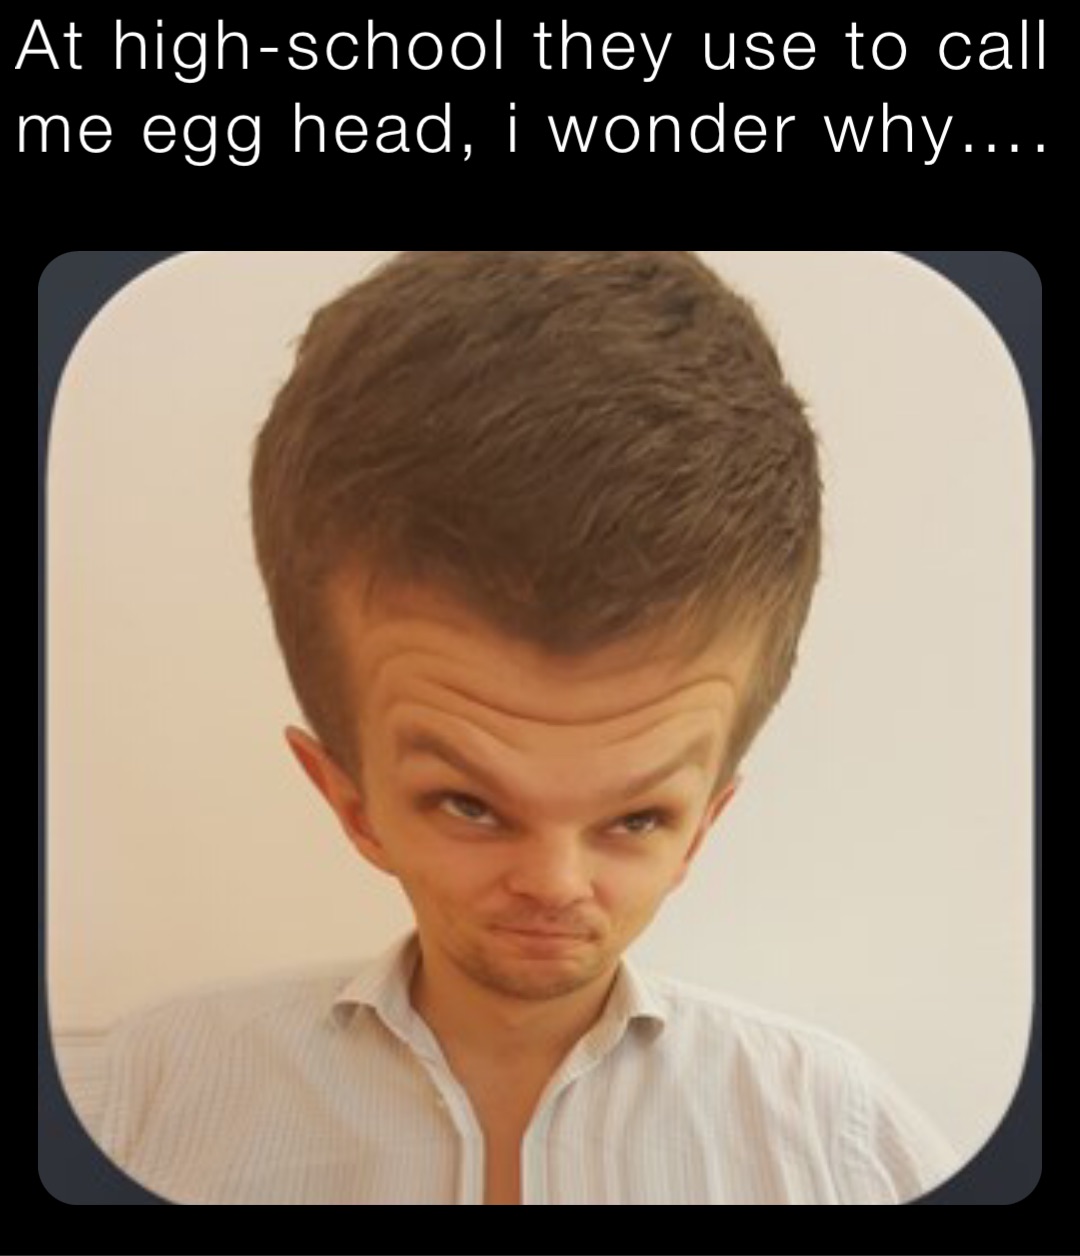 At high-school they use to call me egg head, i wonder why….